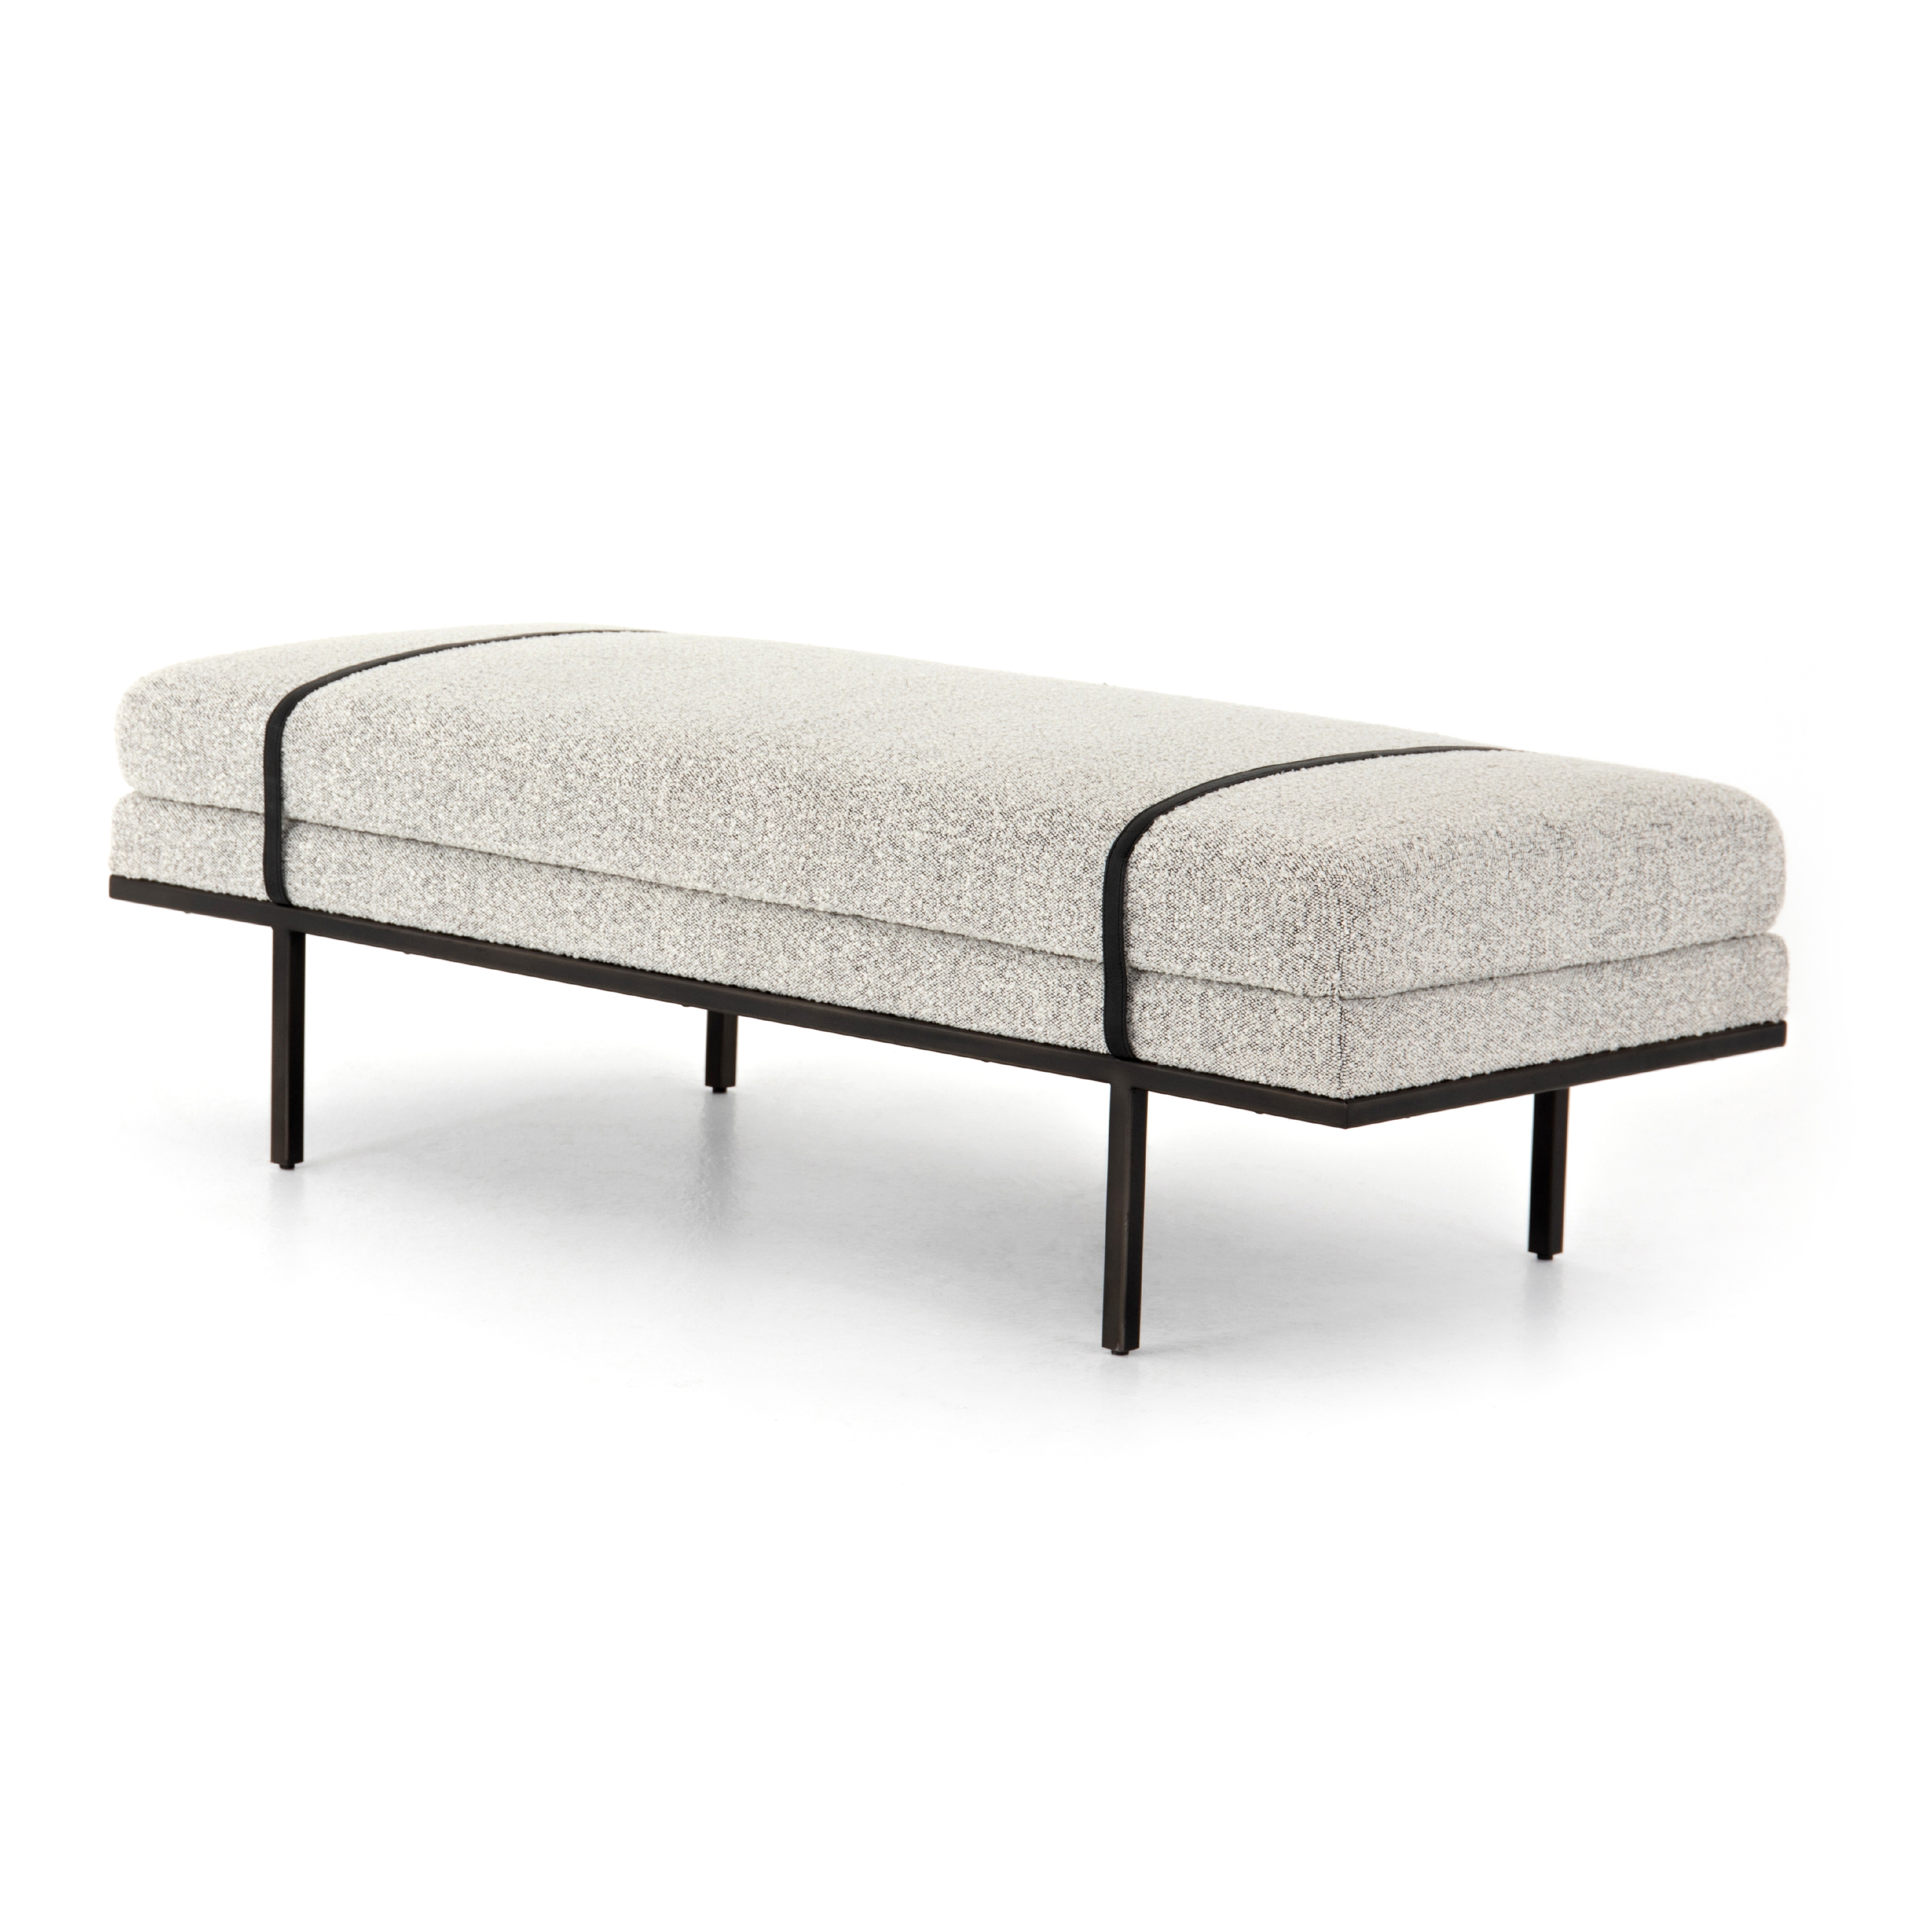 Harris Accent Bench-Knoll Domino - Image 1